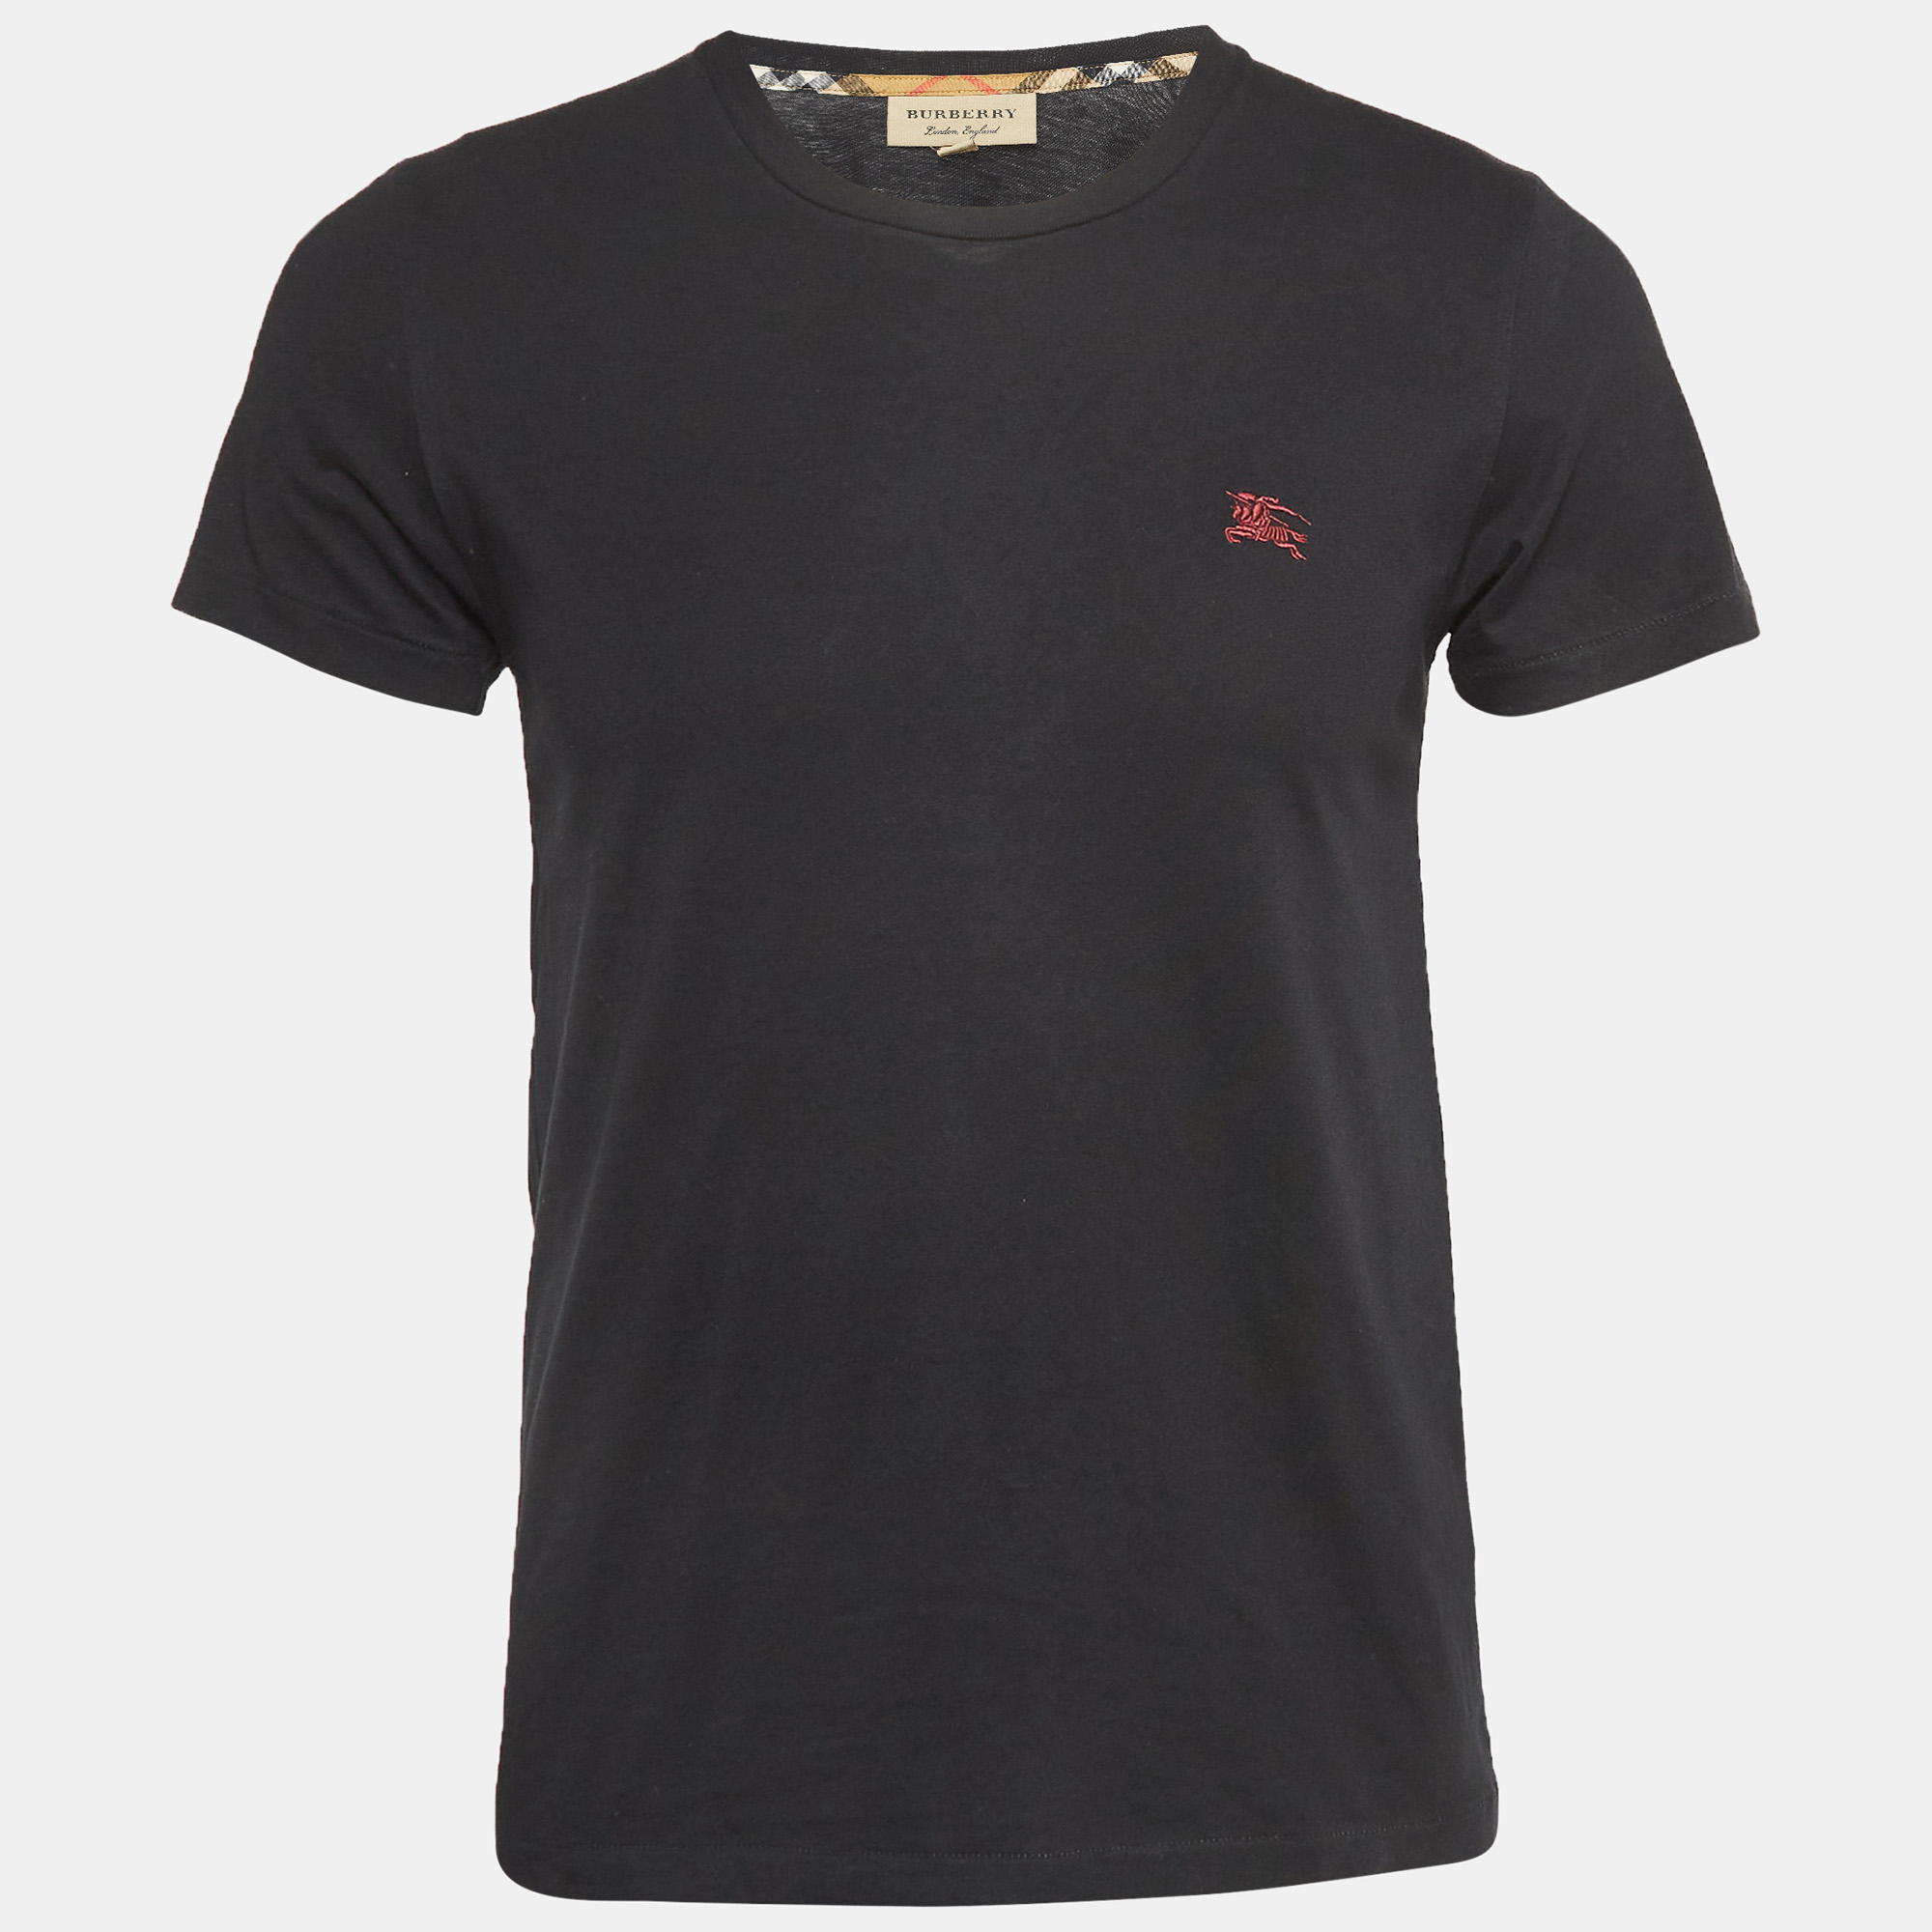 Burberry black cotton logo embroidered crew neck t-shirt s